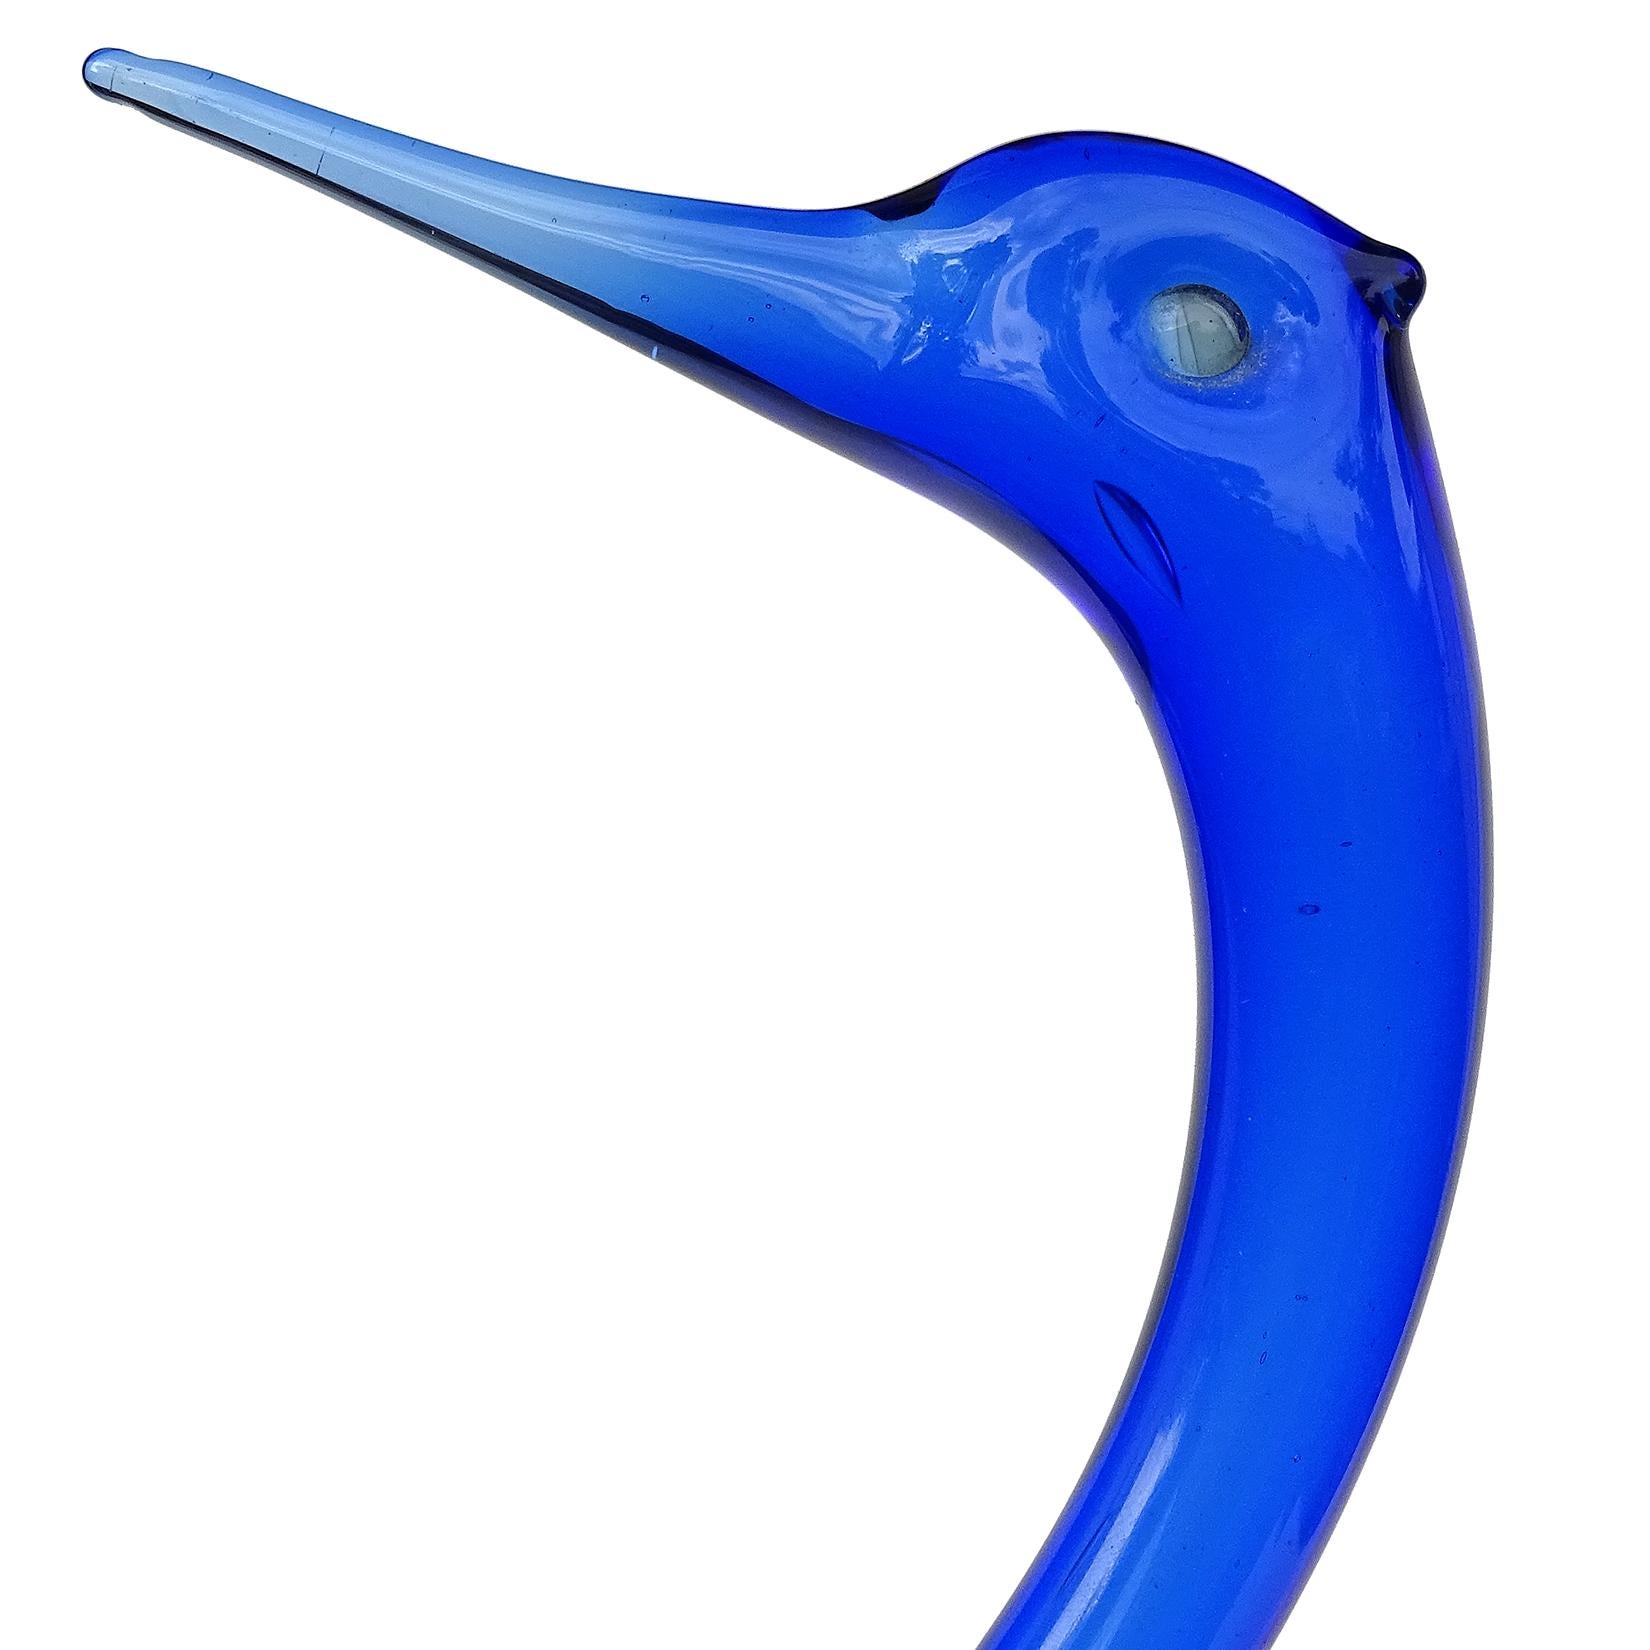 Beautiful vintage Murano hand blown Sommerso cobalt blue and aqua blue Italian art glass swan bird sculpture. Documented to designer Archimede Seguso, with remnants of his large red label underneath. Very elegant shape. Would make a great display